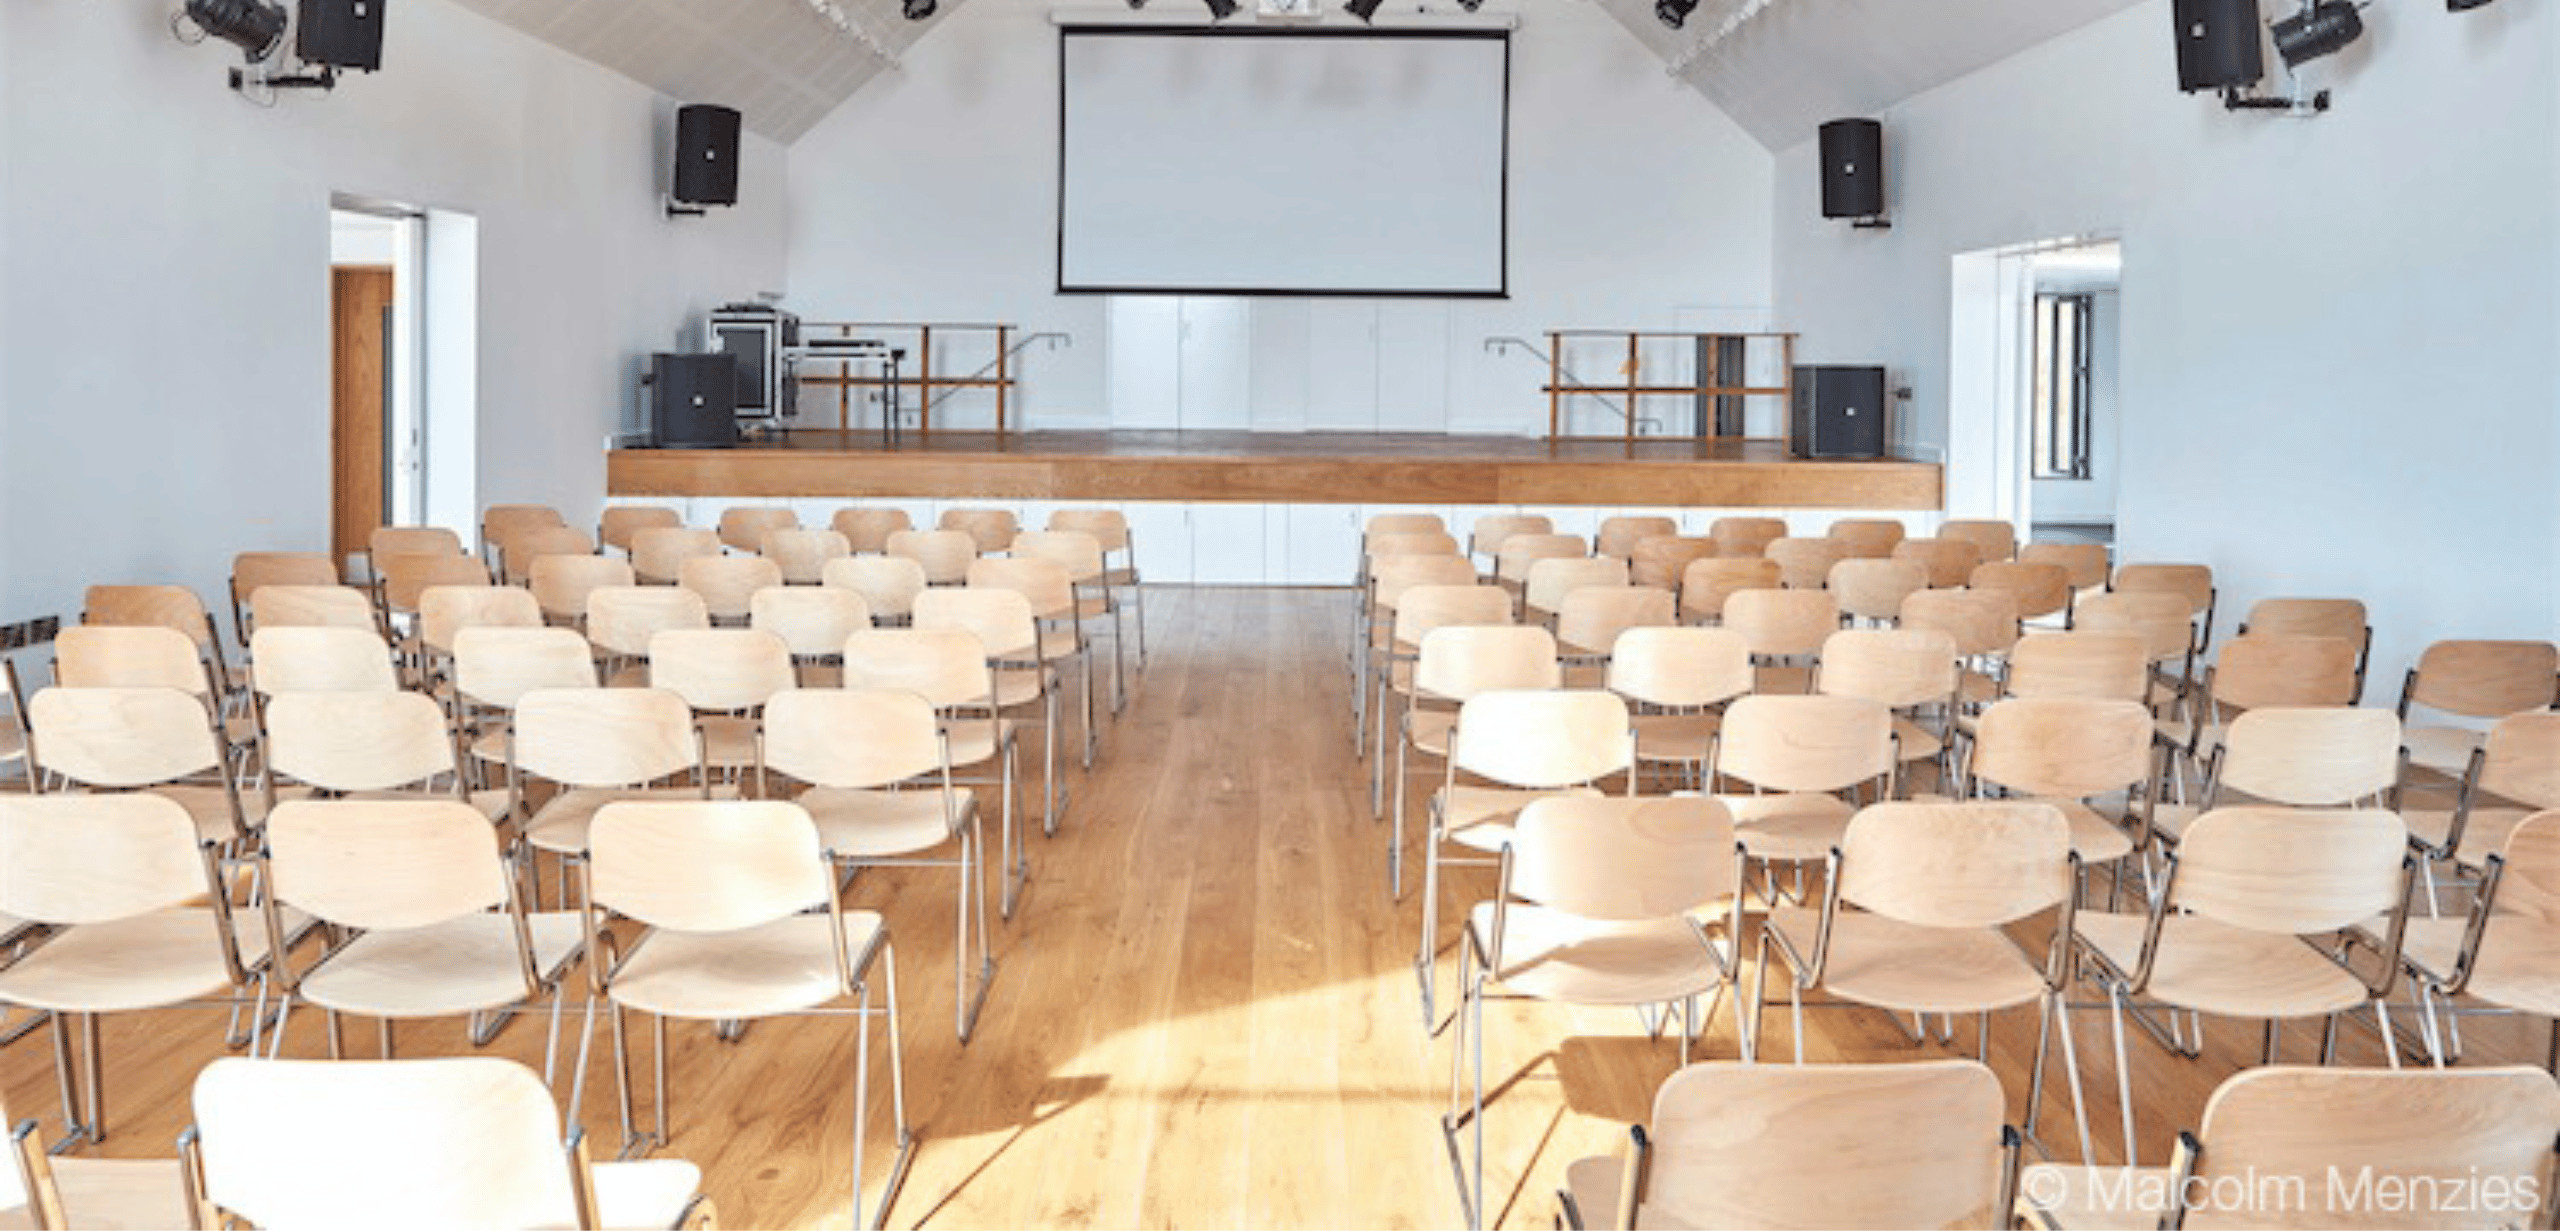 A large room with wooden community seating and a projector screen.